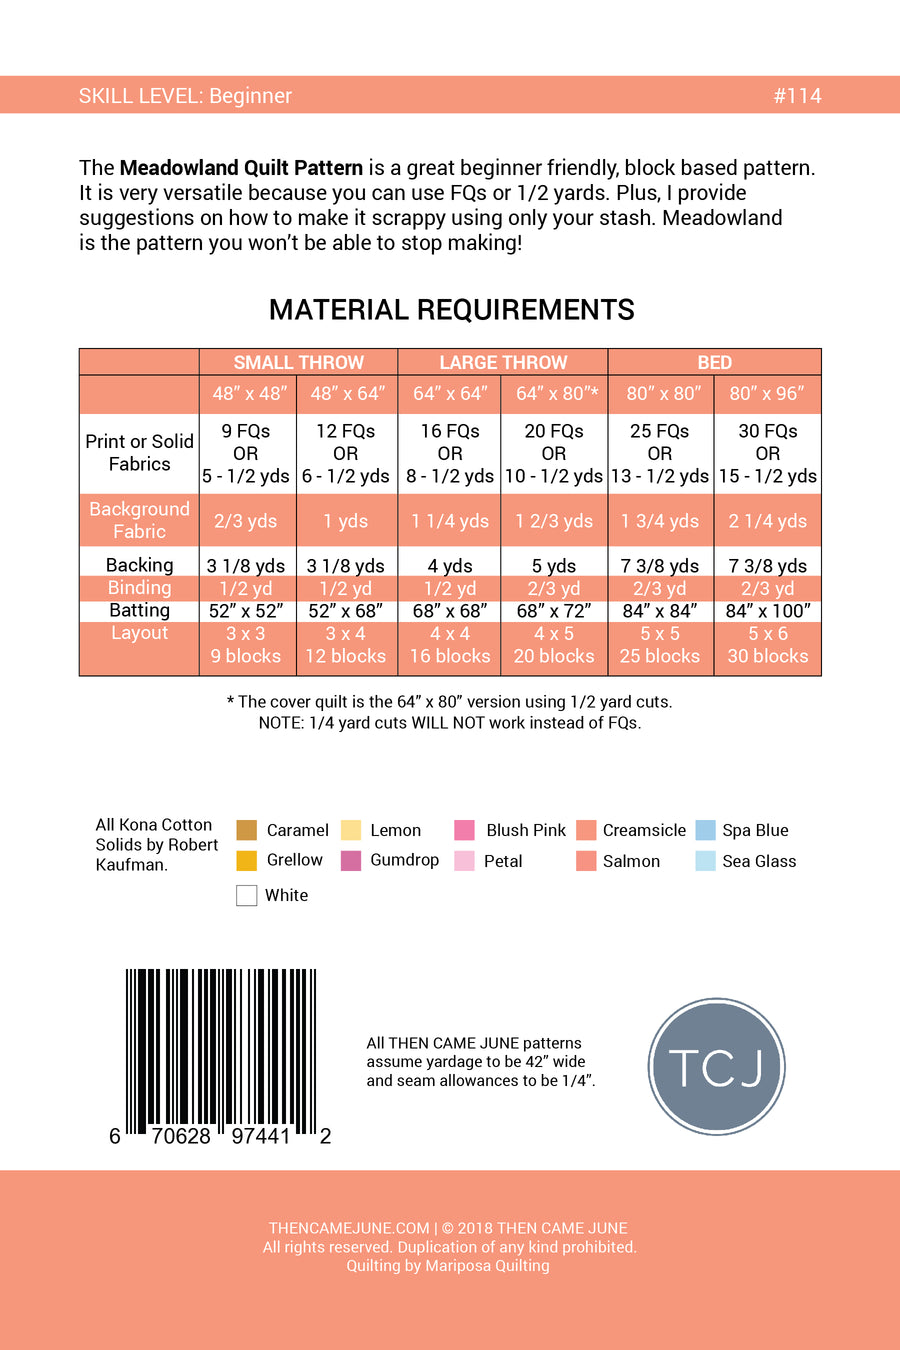 Meadowland Quilt Pattern Fabric Requirements